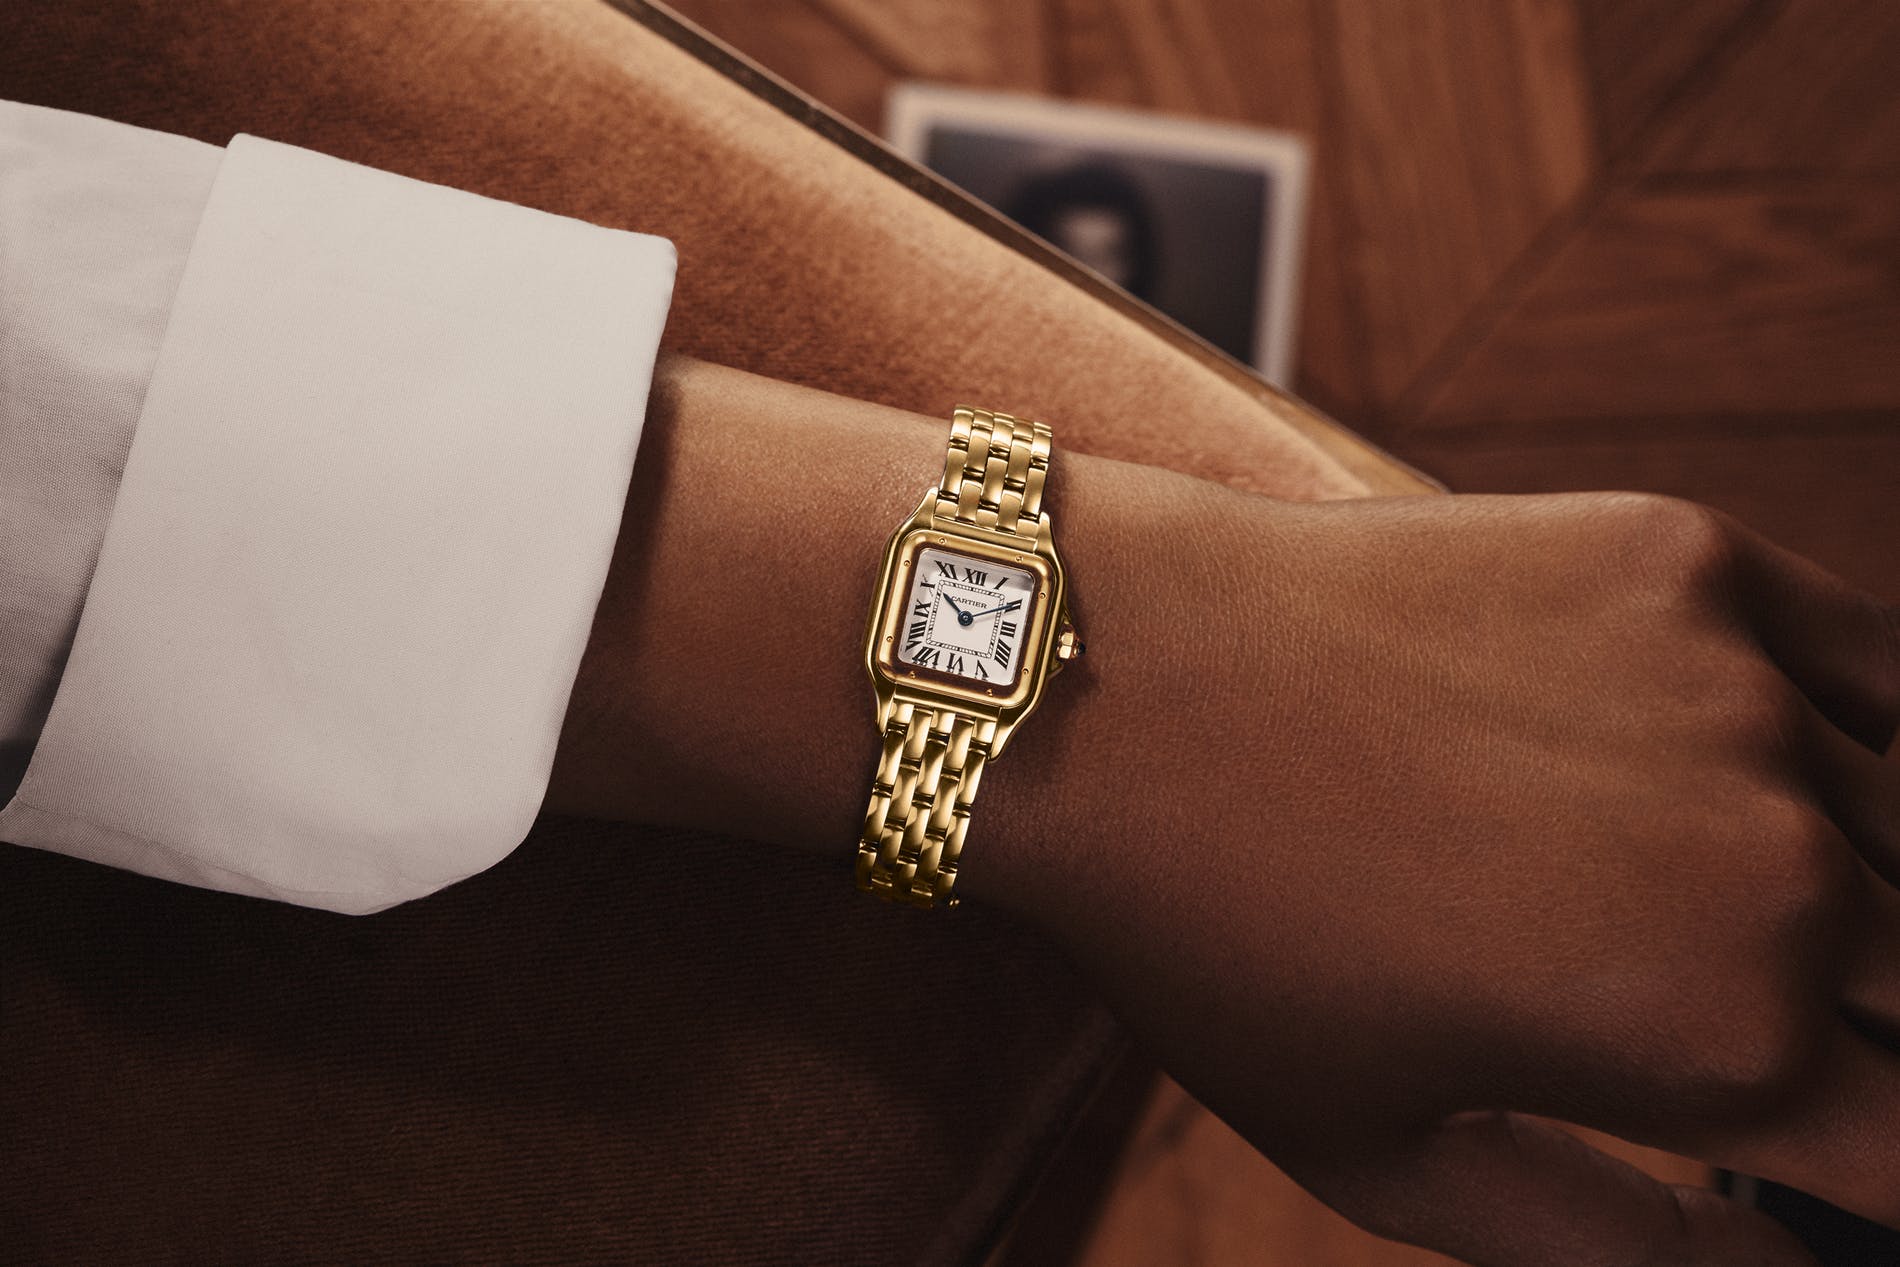 Cartier Panthere Watch Review: Does The IT Girl Watch Live Up To The ...